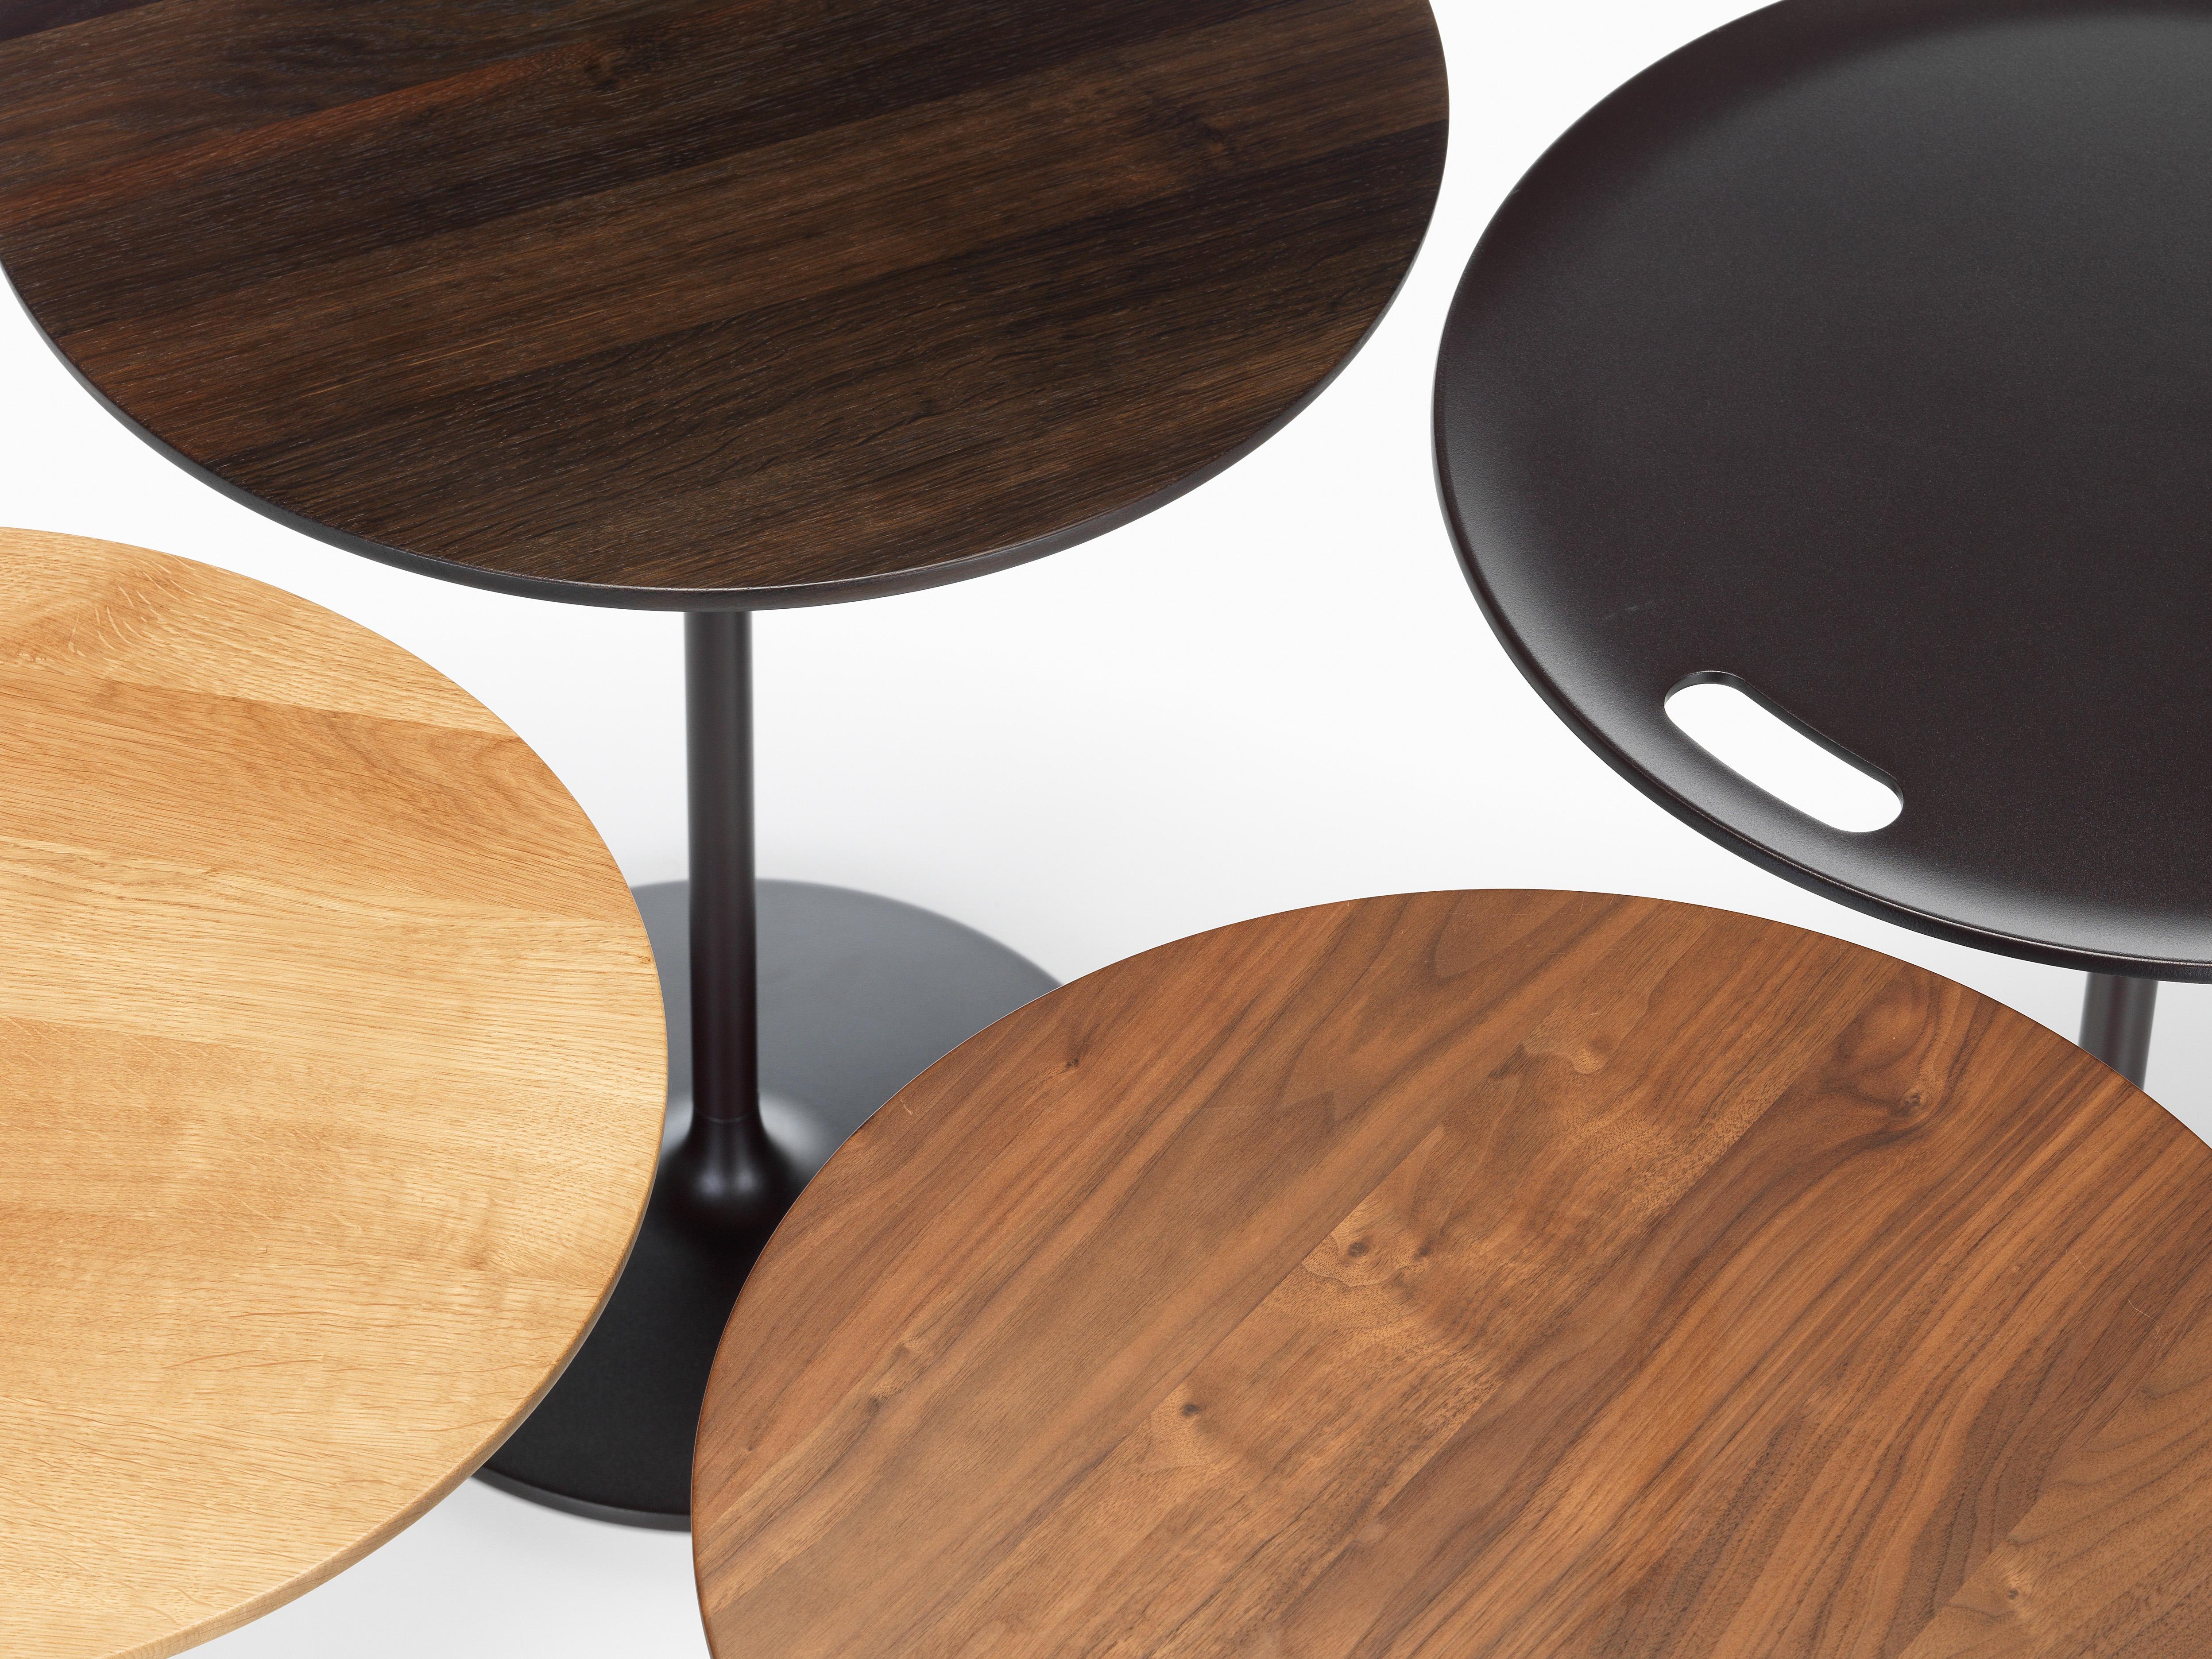 These products are only available in the United States.

 The occasional tables by Jasper Morrison have an understated look and come in three heights – ranging from a low side table to a standard serving table. They have round, bevelled-edge tops